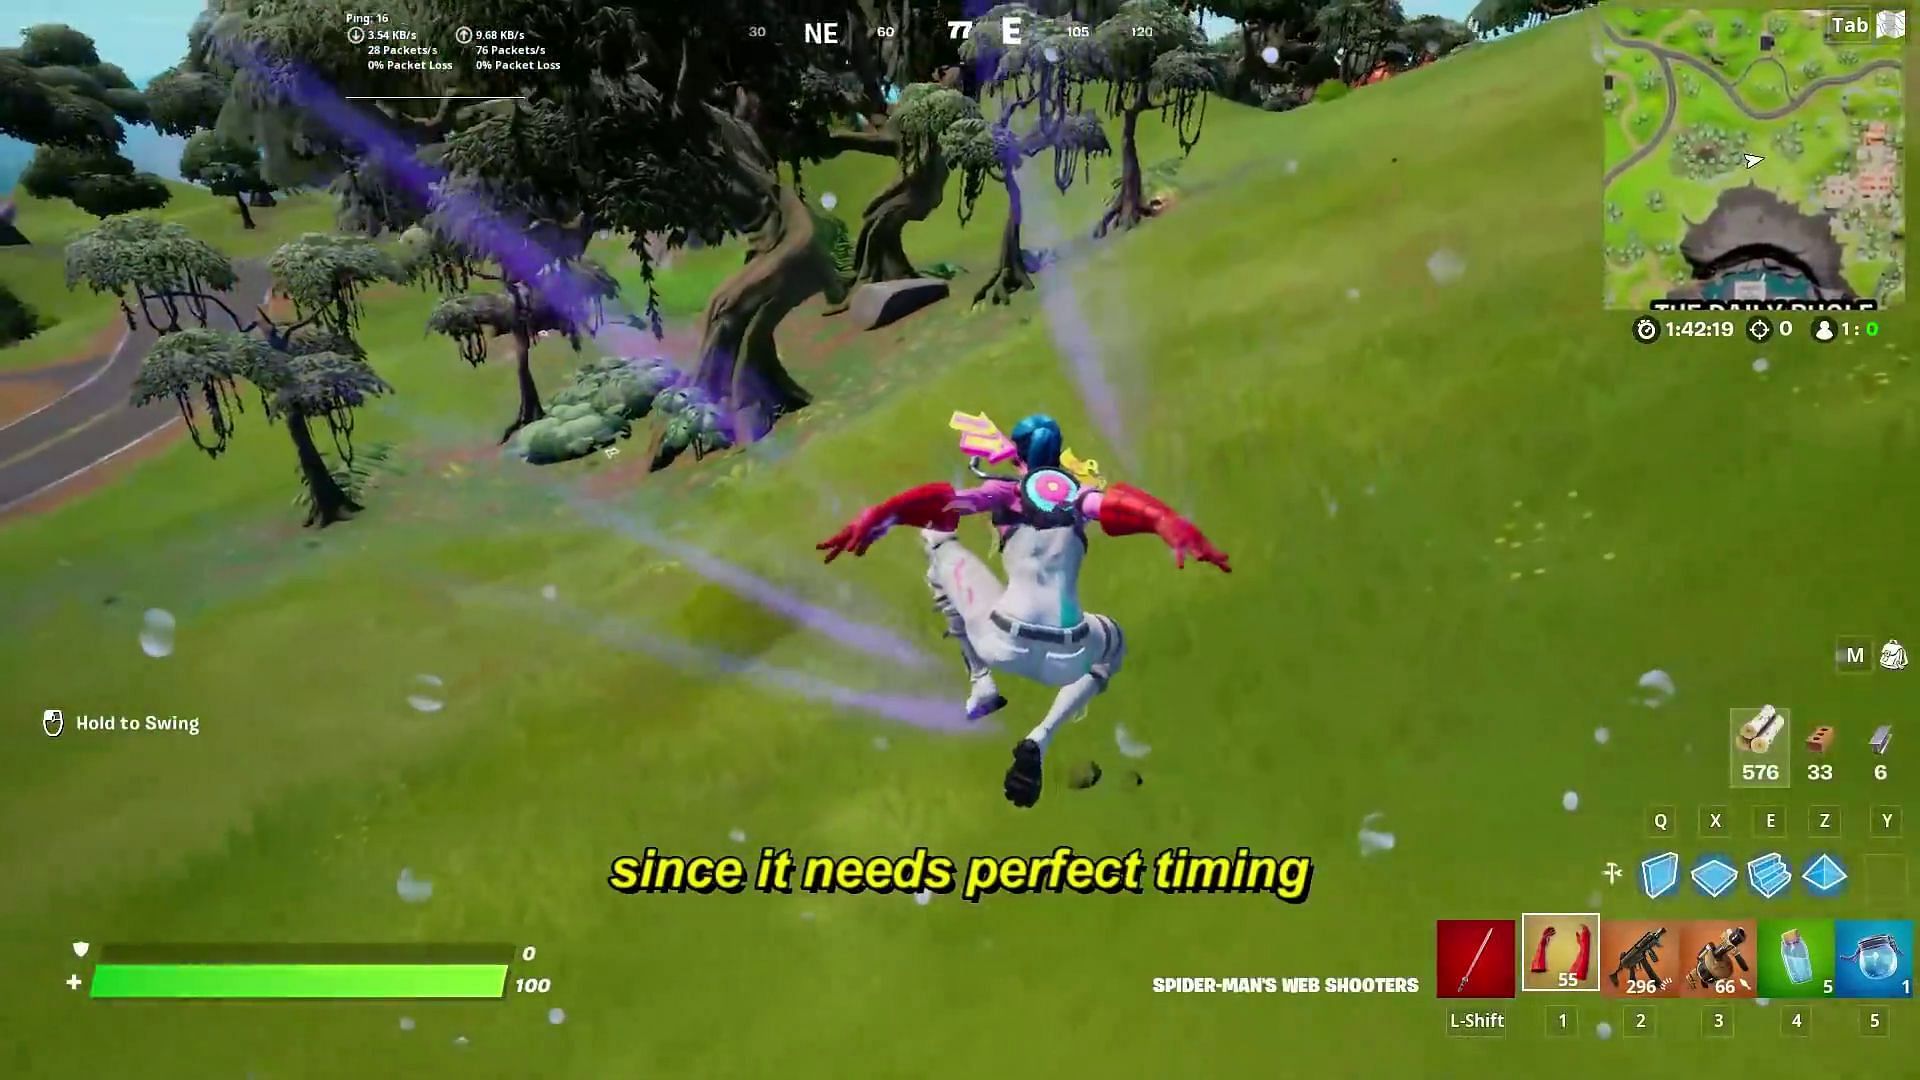 Once launched, use the mythic to swing around (Image via YouTube/GKI)